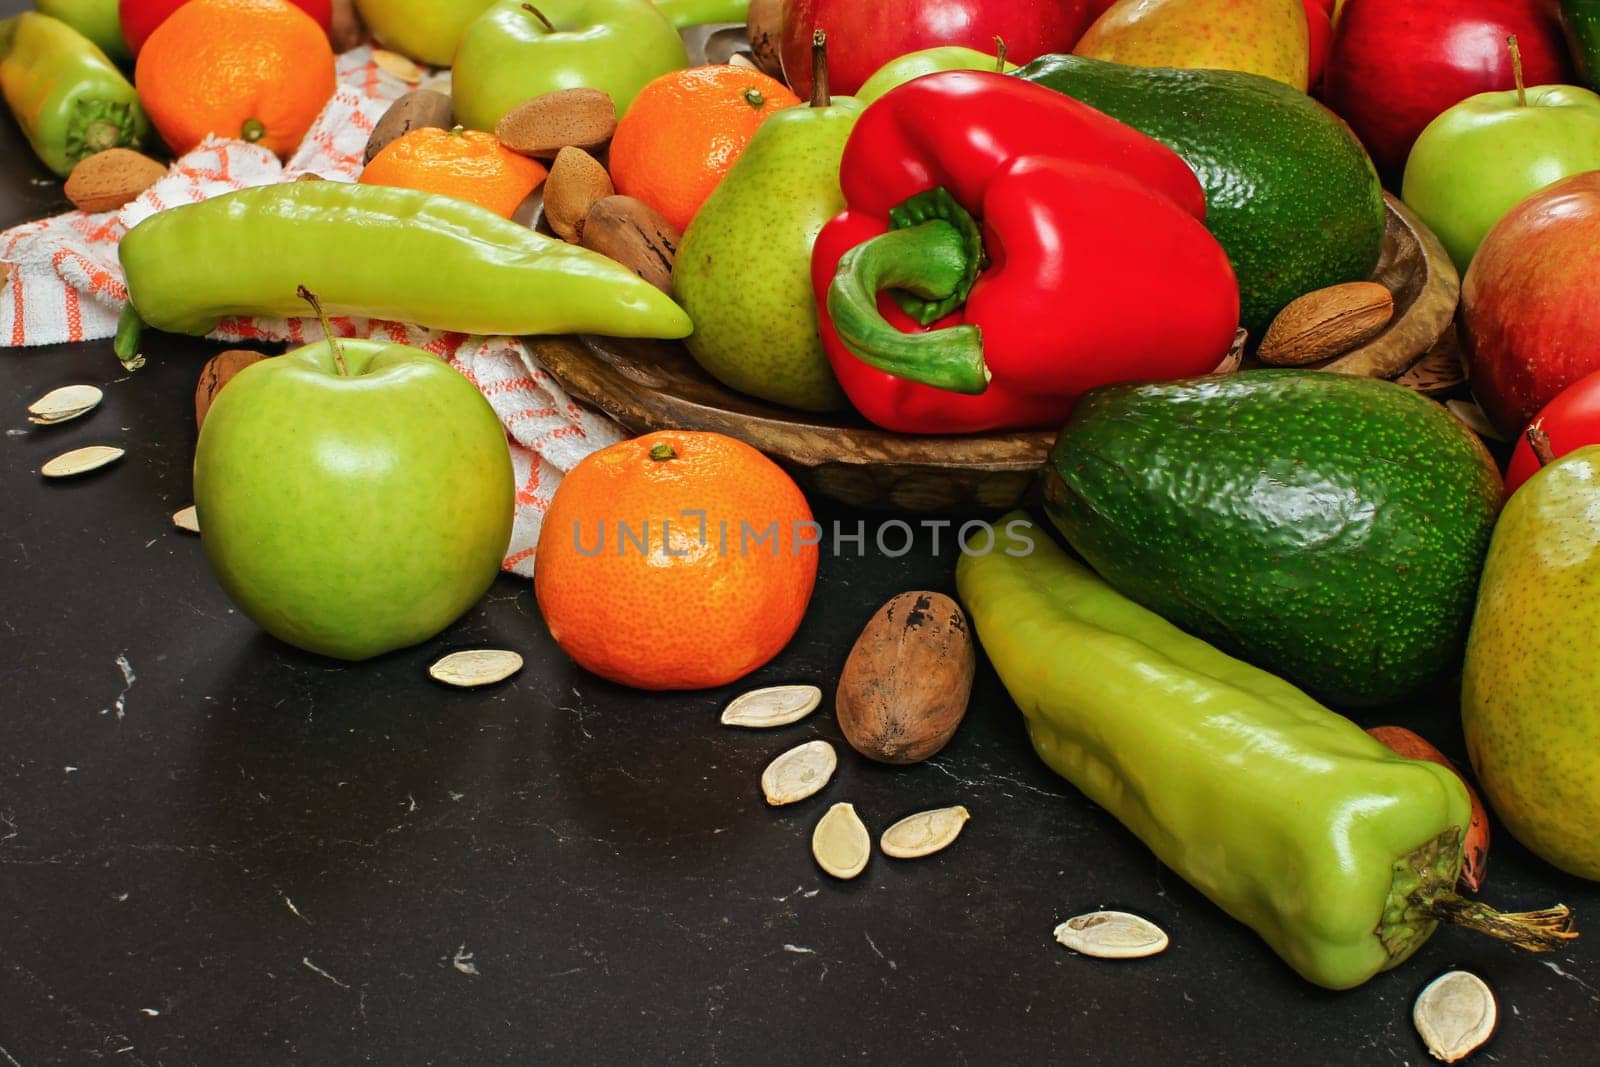 Mixed fruits and vegetables - red peppers, avocado, apples, pears, tangerines, pecan nuts, almonds and pumpkin seeds on wooden bowl, close up view from above by Ivanko